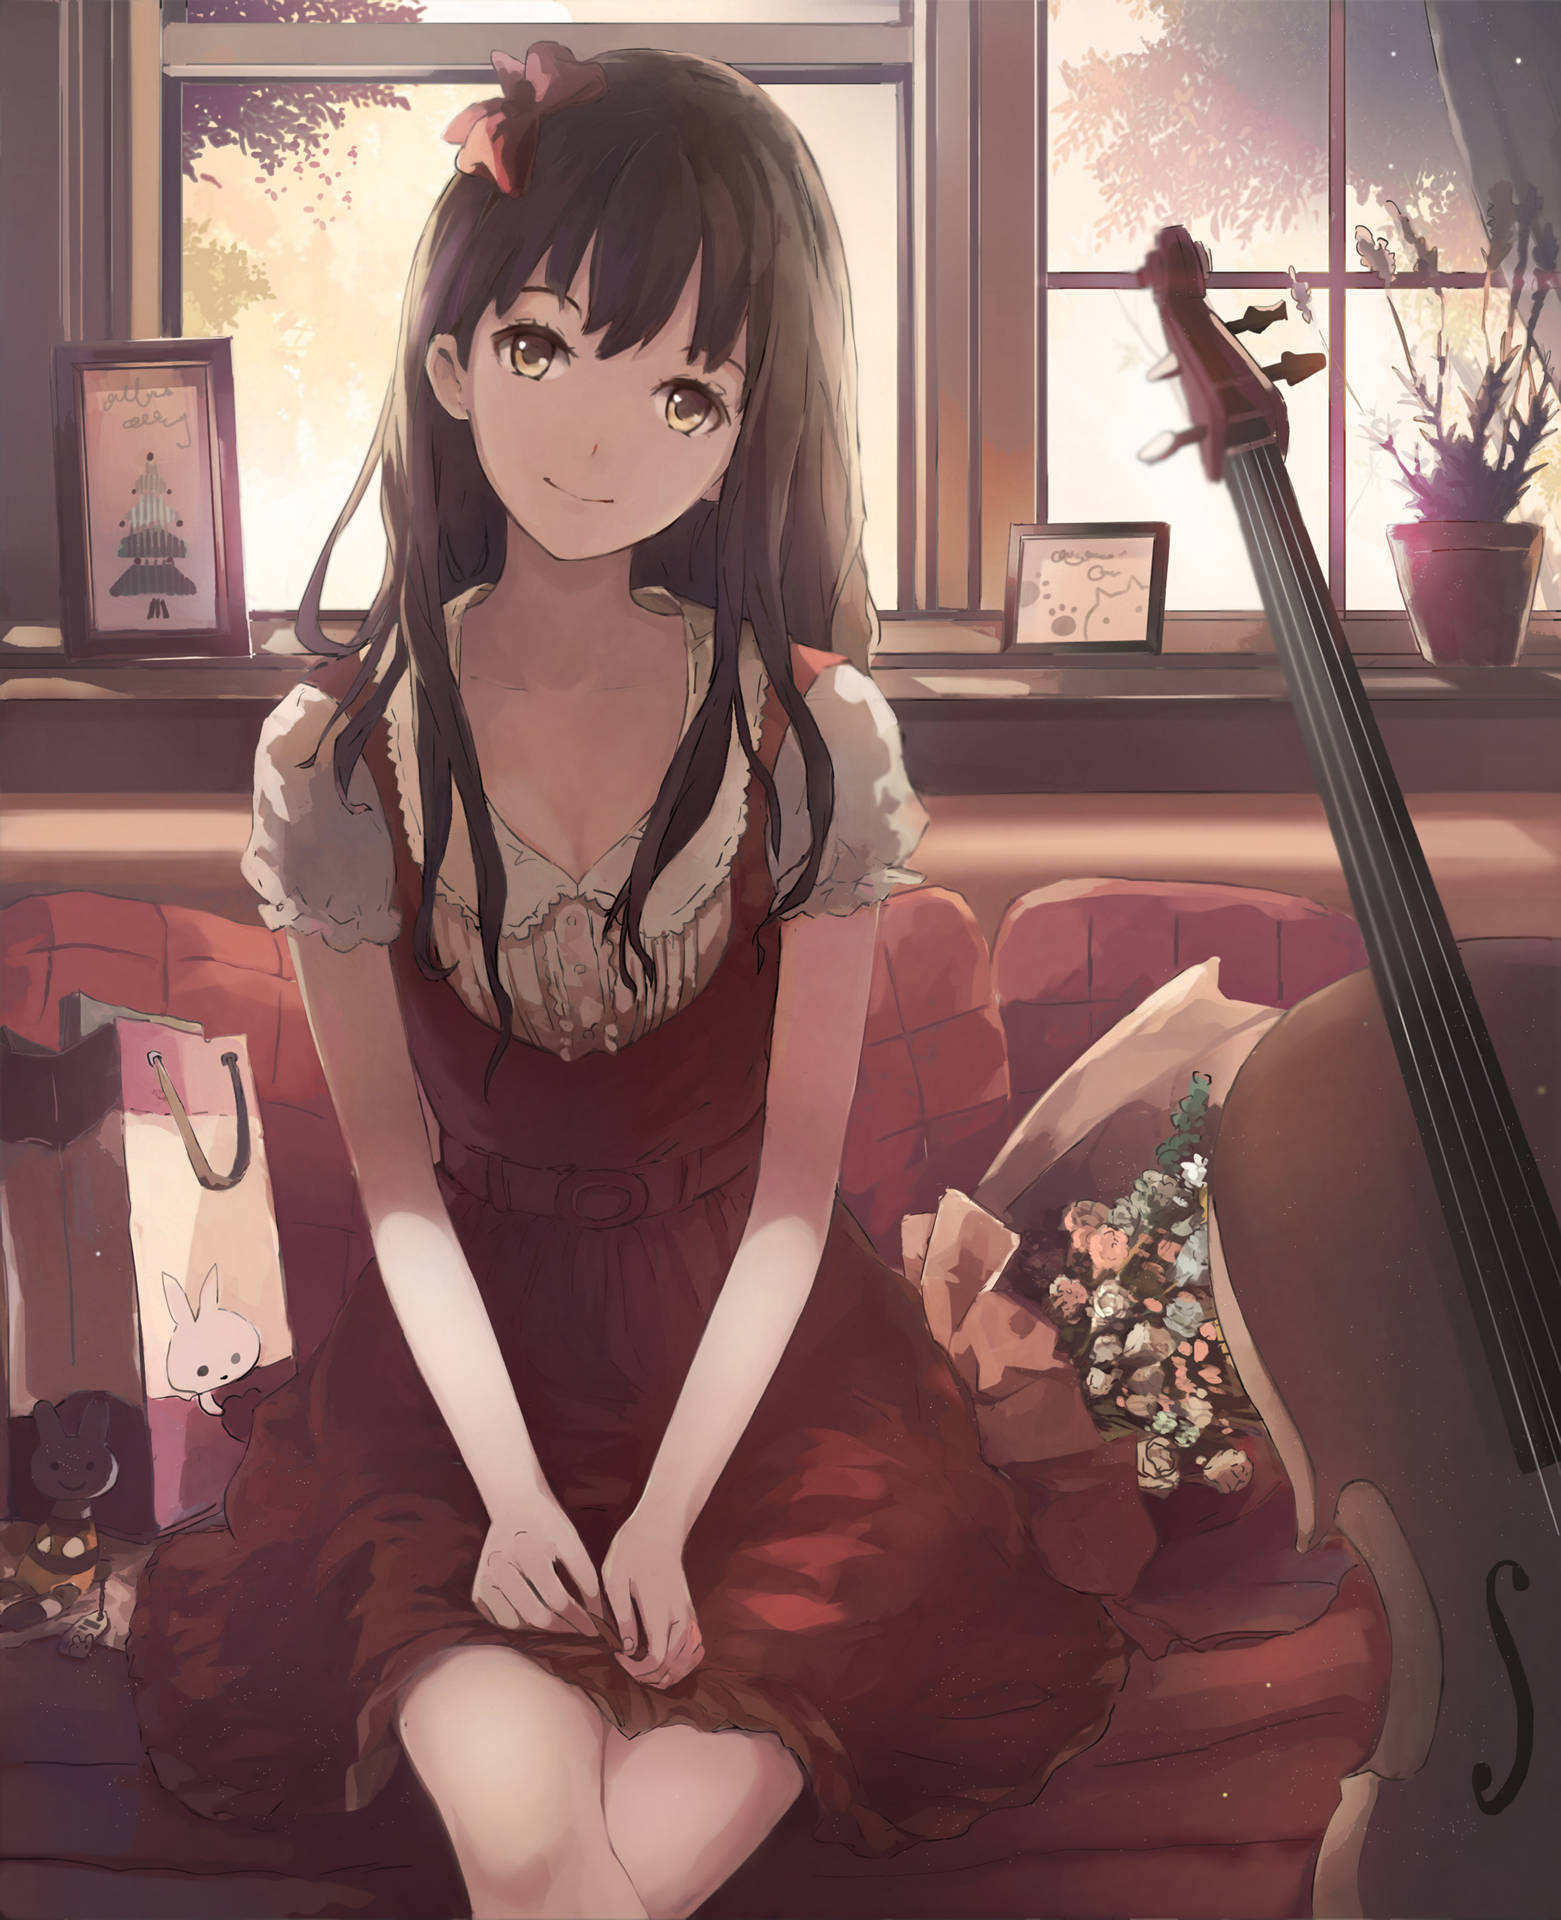 Cute Anime Girl With Cello Background